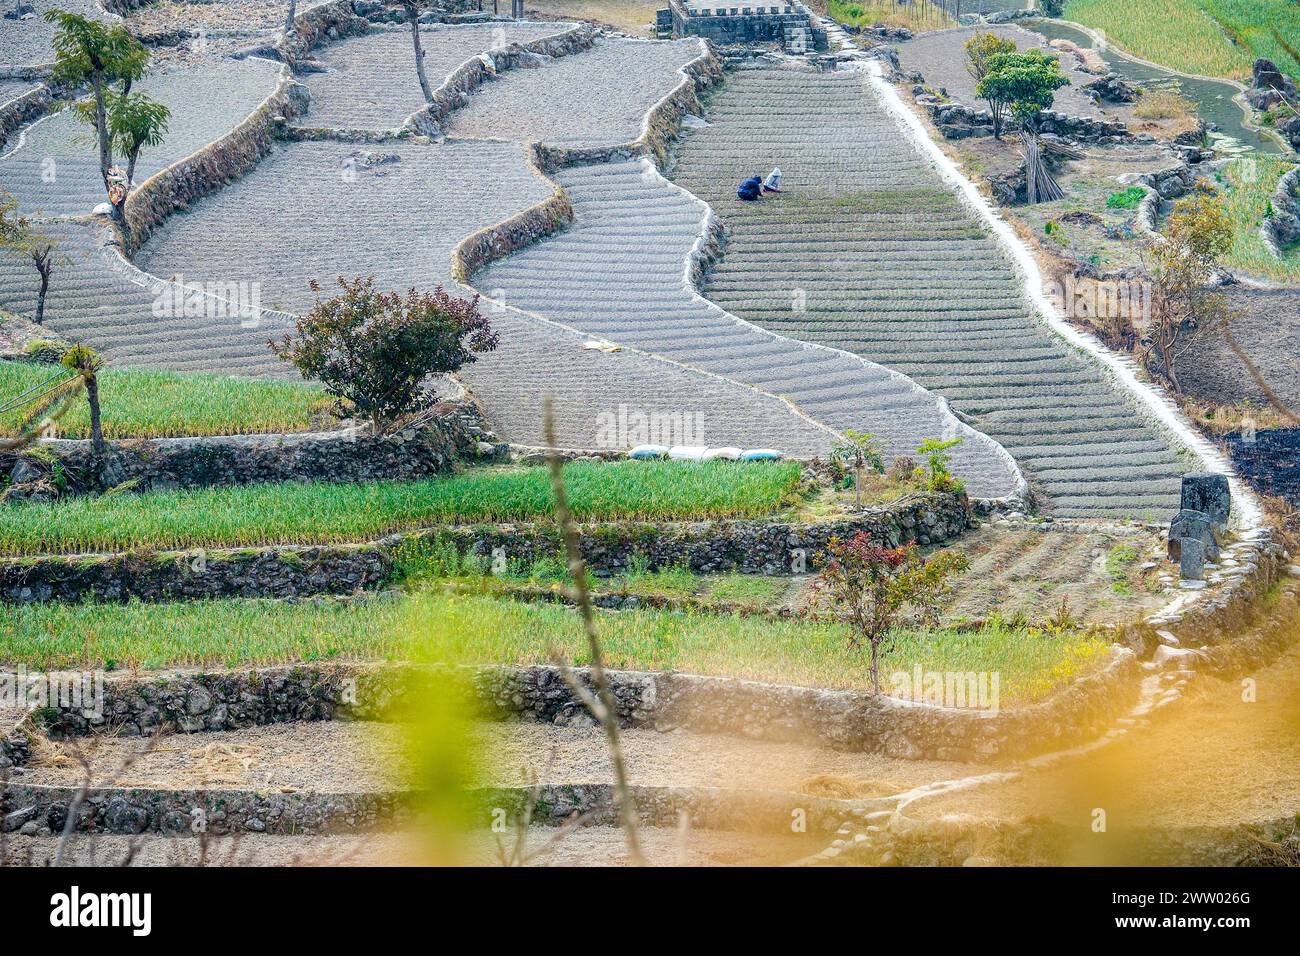 Terraced fields / paddy fields in Nagaland, North East India Stock Photo